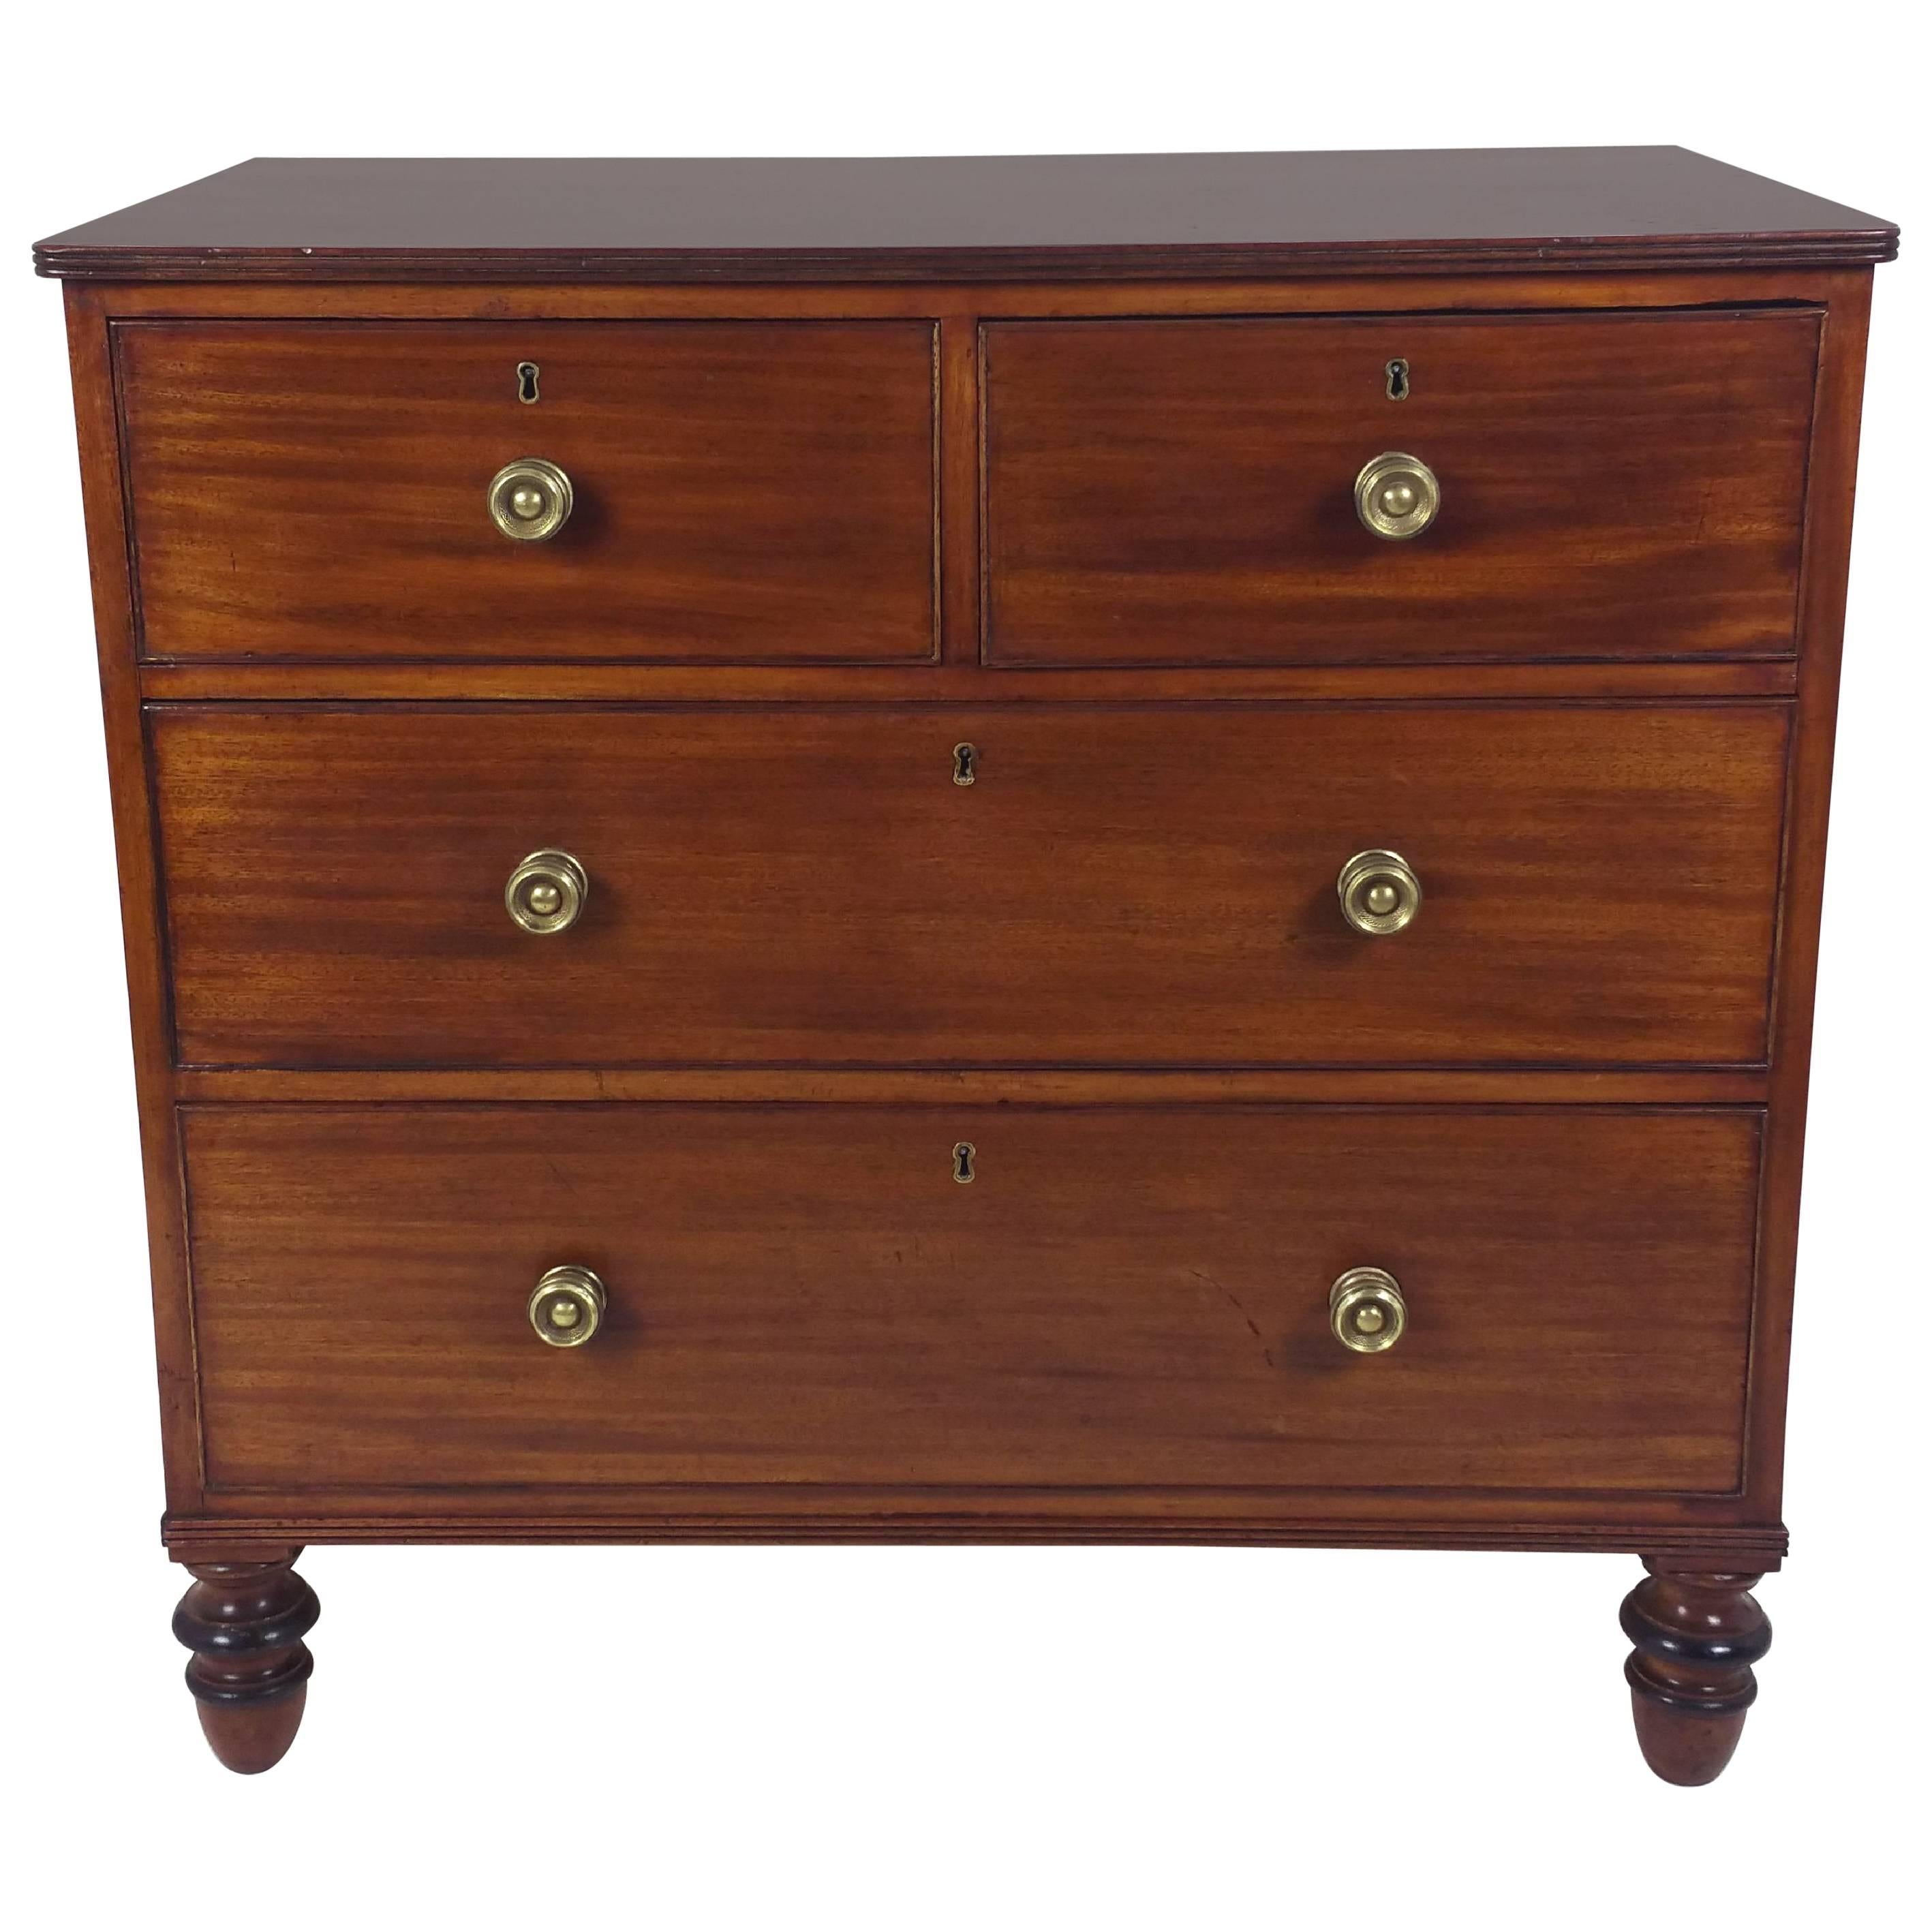 Regency Figured Mahogany Low Chest of Drawers